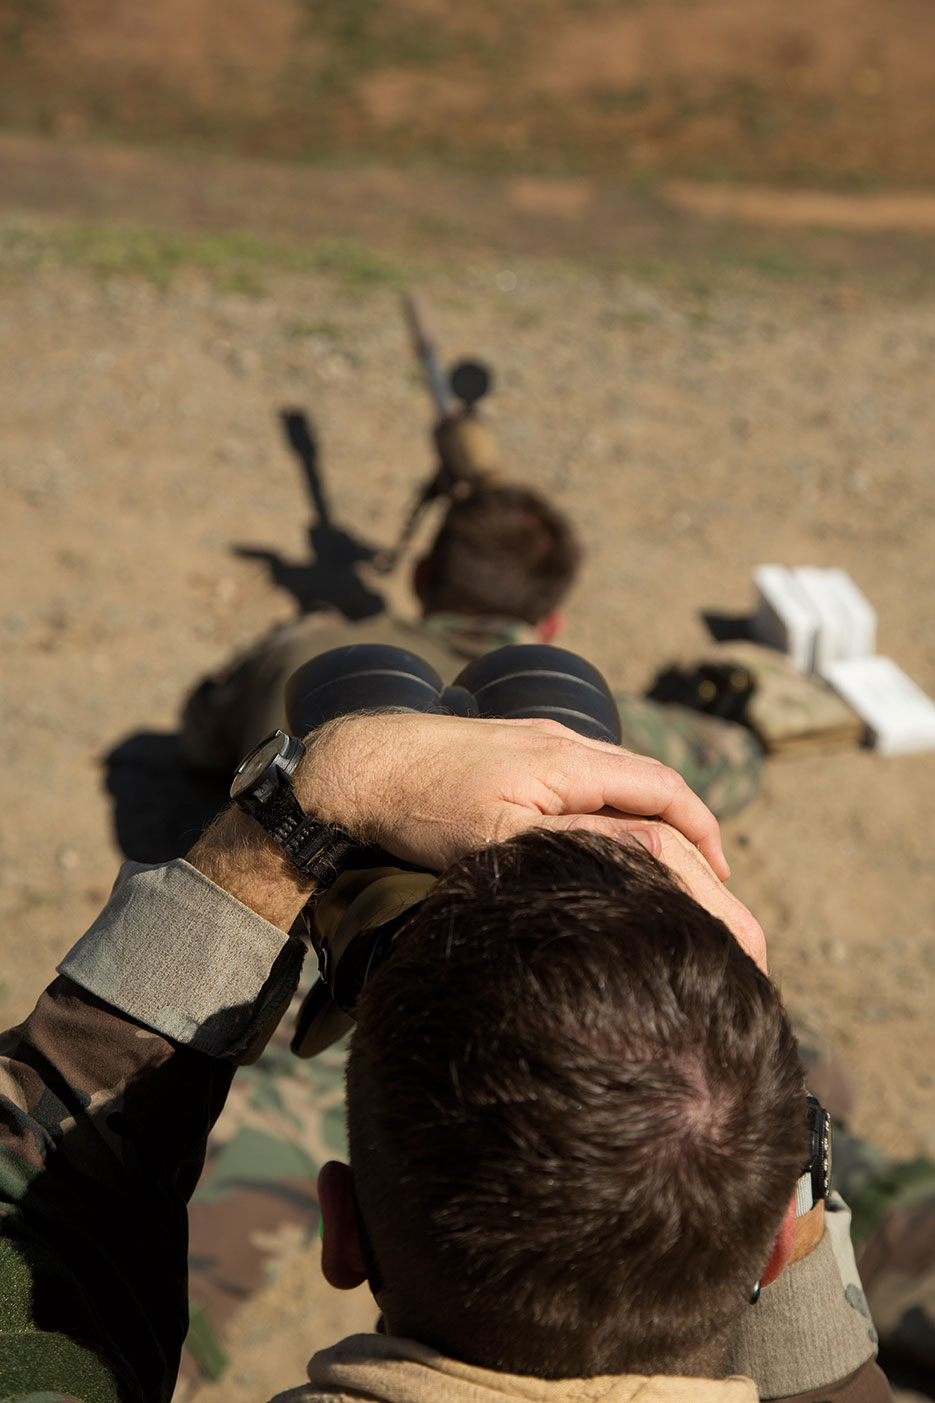 Marine spots for his teammate, who is firing at distant, static targets on range aboard Marine Corps Base Camp Pendleton, California, October 2015 (U.S. Marine Corps)